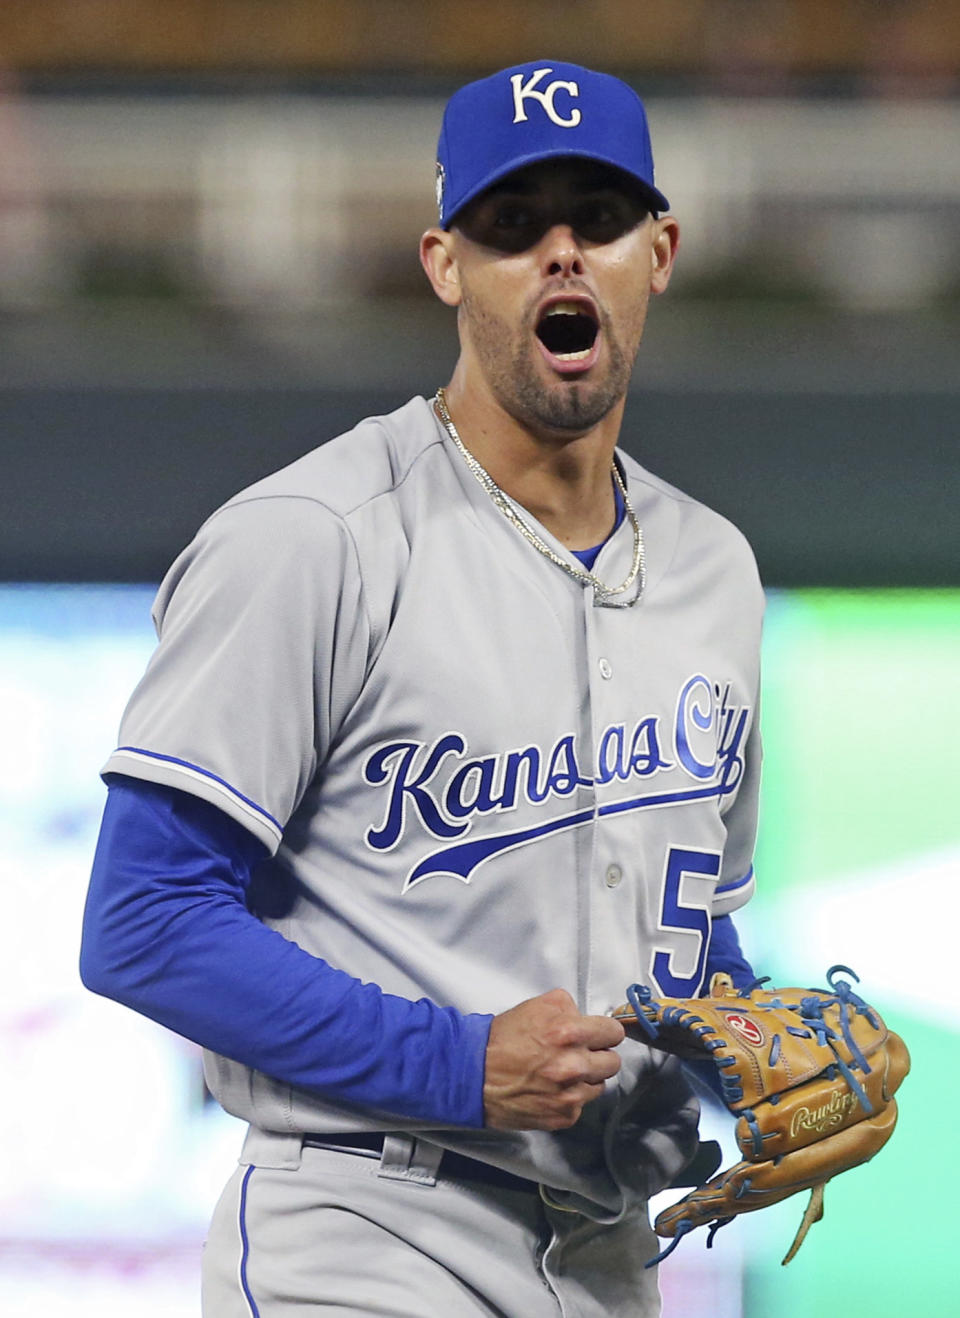 Kansas City Royals pitcher Jorge Lopez celebrates after striking out Minnesota Twins' Mitch Garver to keep a perfect game intact through the eighth inning of a baseball game Saturday, Sept. 8, 2018, in Minneapolis. Lopez gave up a walk and a hit in the ninth inning, and Lopez was pulled from the game. The Royals won 4-1. (AP Photo/Jim Mone)